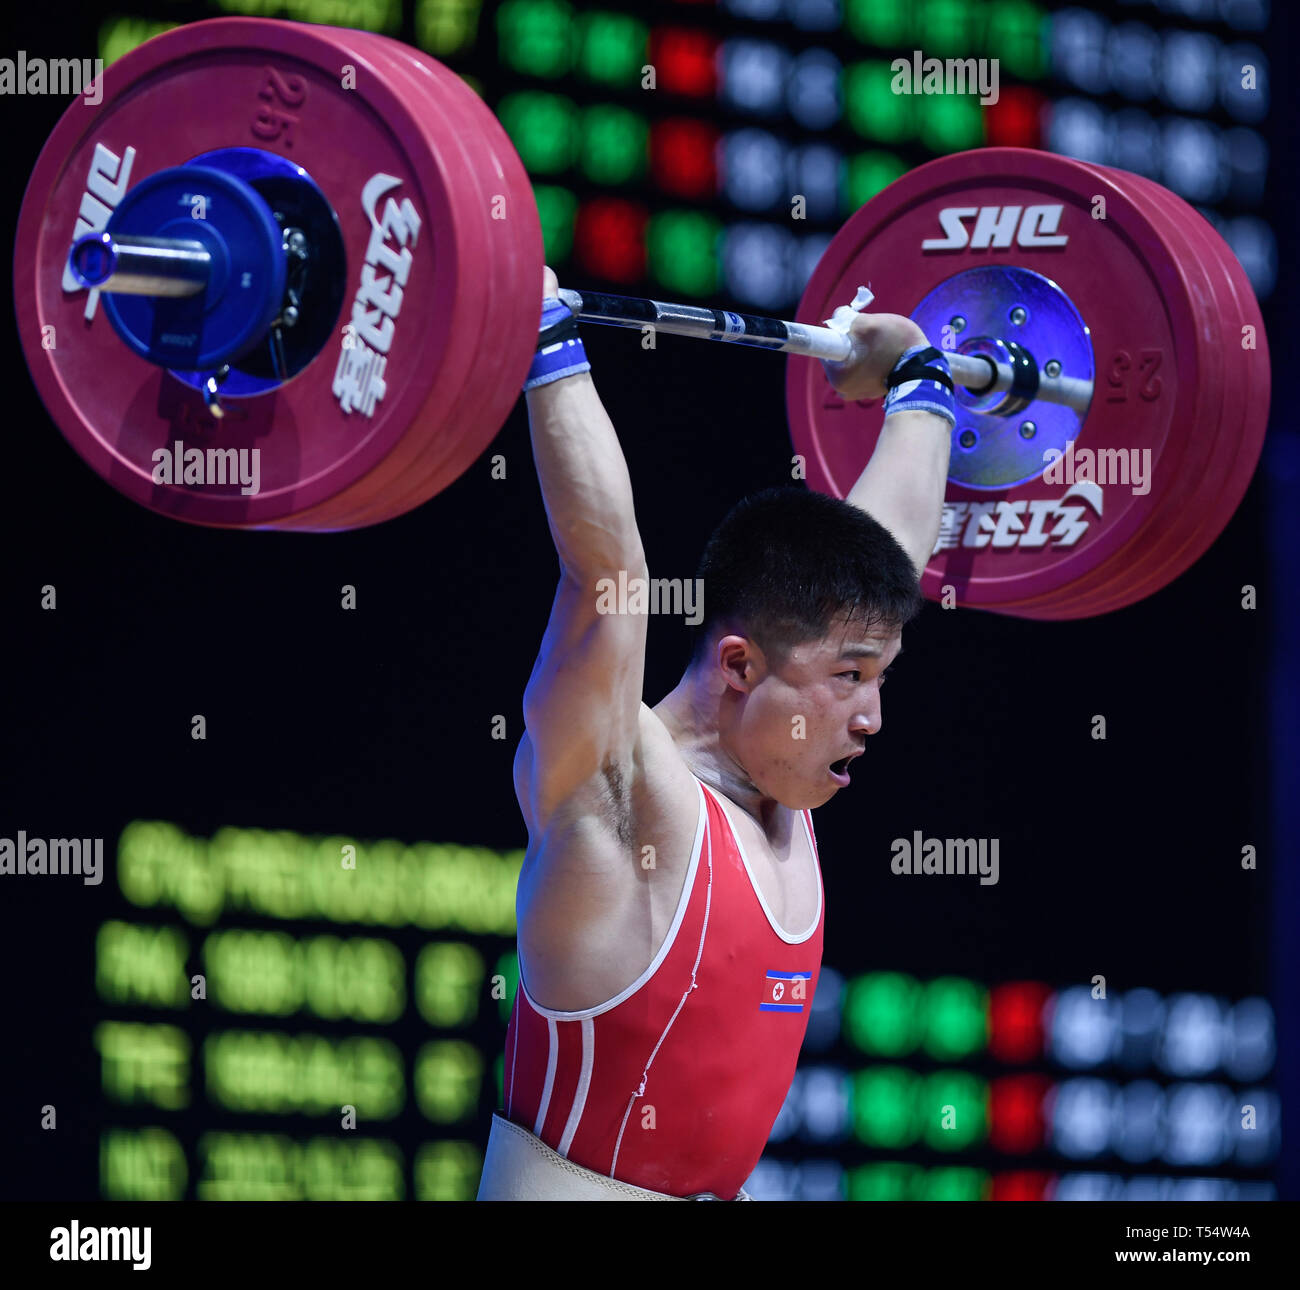 Ningbo, China's Zhejiang Province. 21st Apr, 2019. Pak Jong Ju of the Democratic People's Republic of Korea competes during the men's weightlifting 67kg event at the Asian Weightlifting Championships in Ningbo, east China's Zhejiang Province, April 21, 2019. Pak Jong Ju won the bronze with 322 points in total. Credit: Huang Zongzhi/Xinhua/Alamy Live News Stock Photo